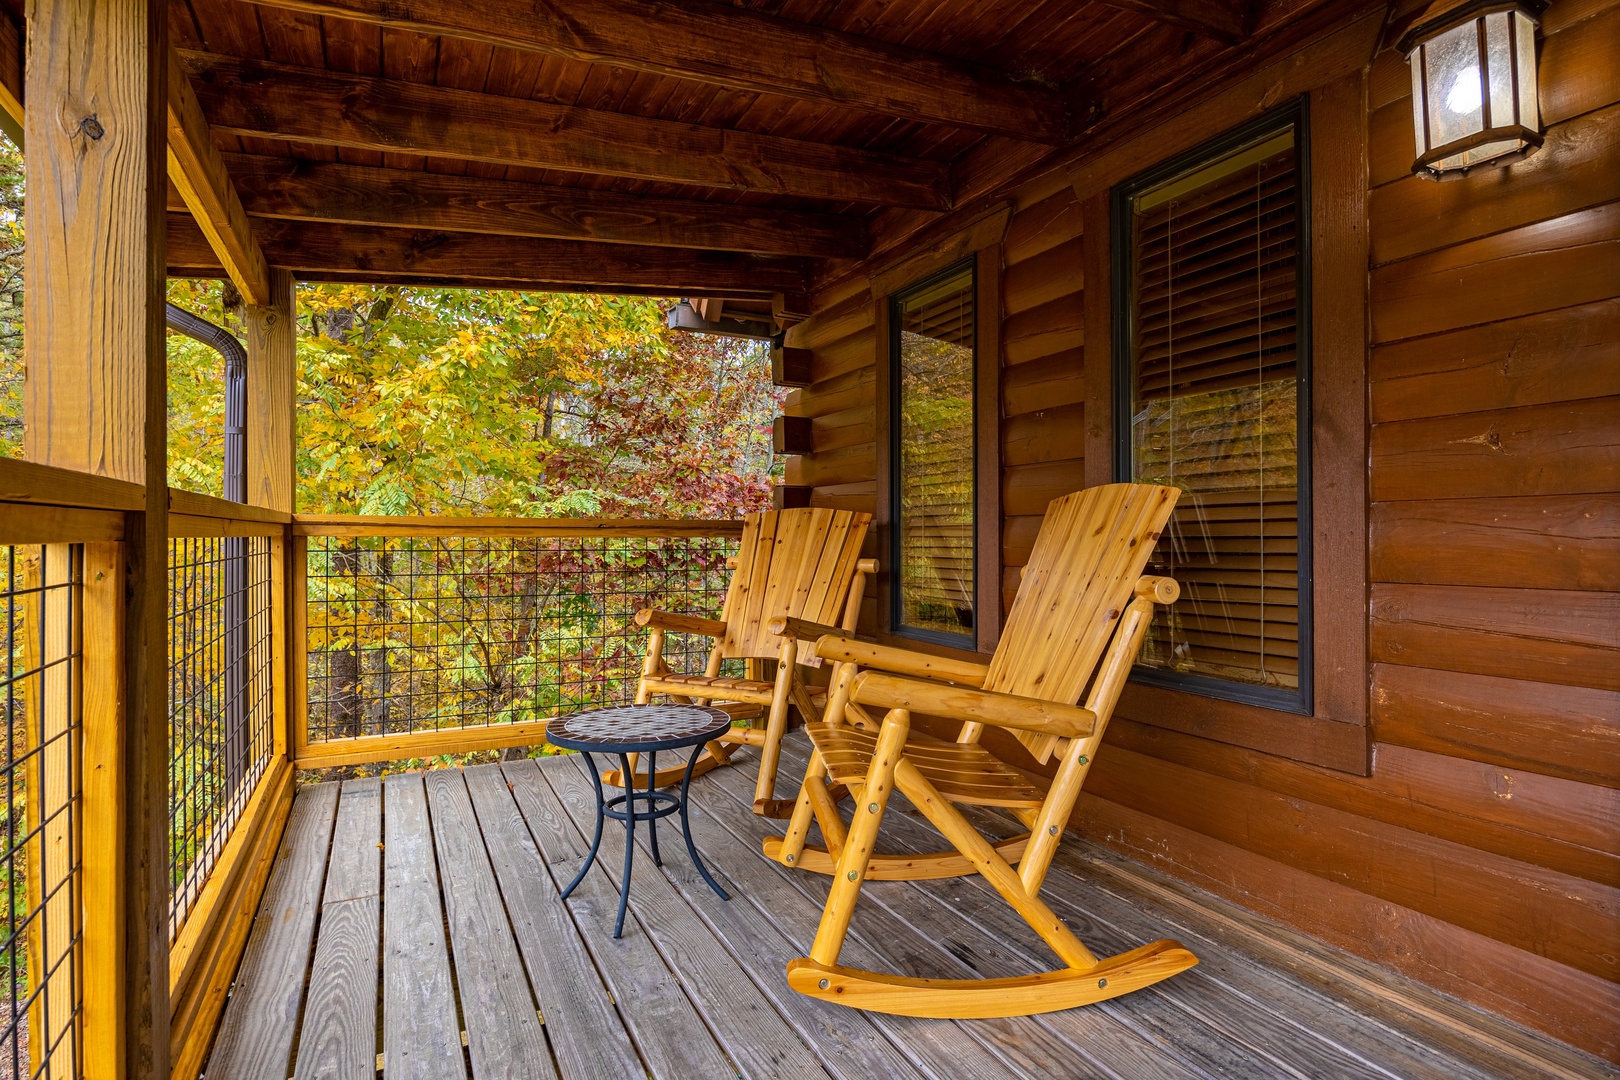 Rocking Chairs Under Covered Deck at Mountain Lake Getaway, a 3 bedroom cabin rental located in douglas lake